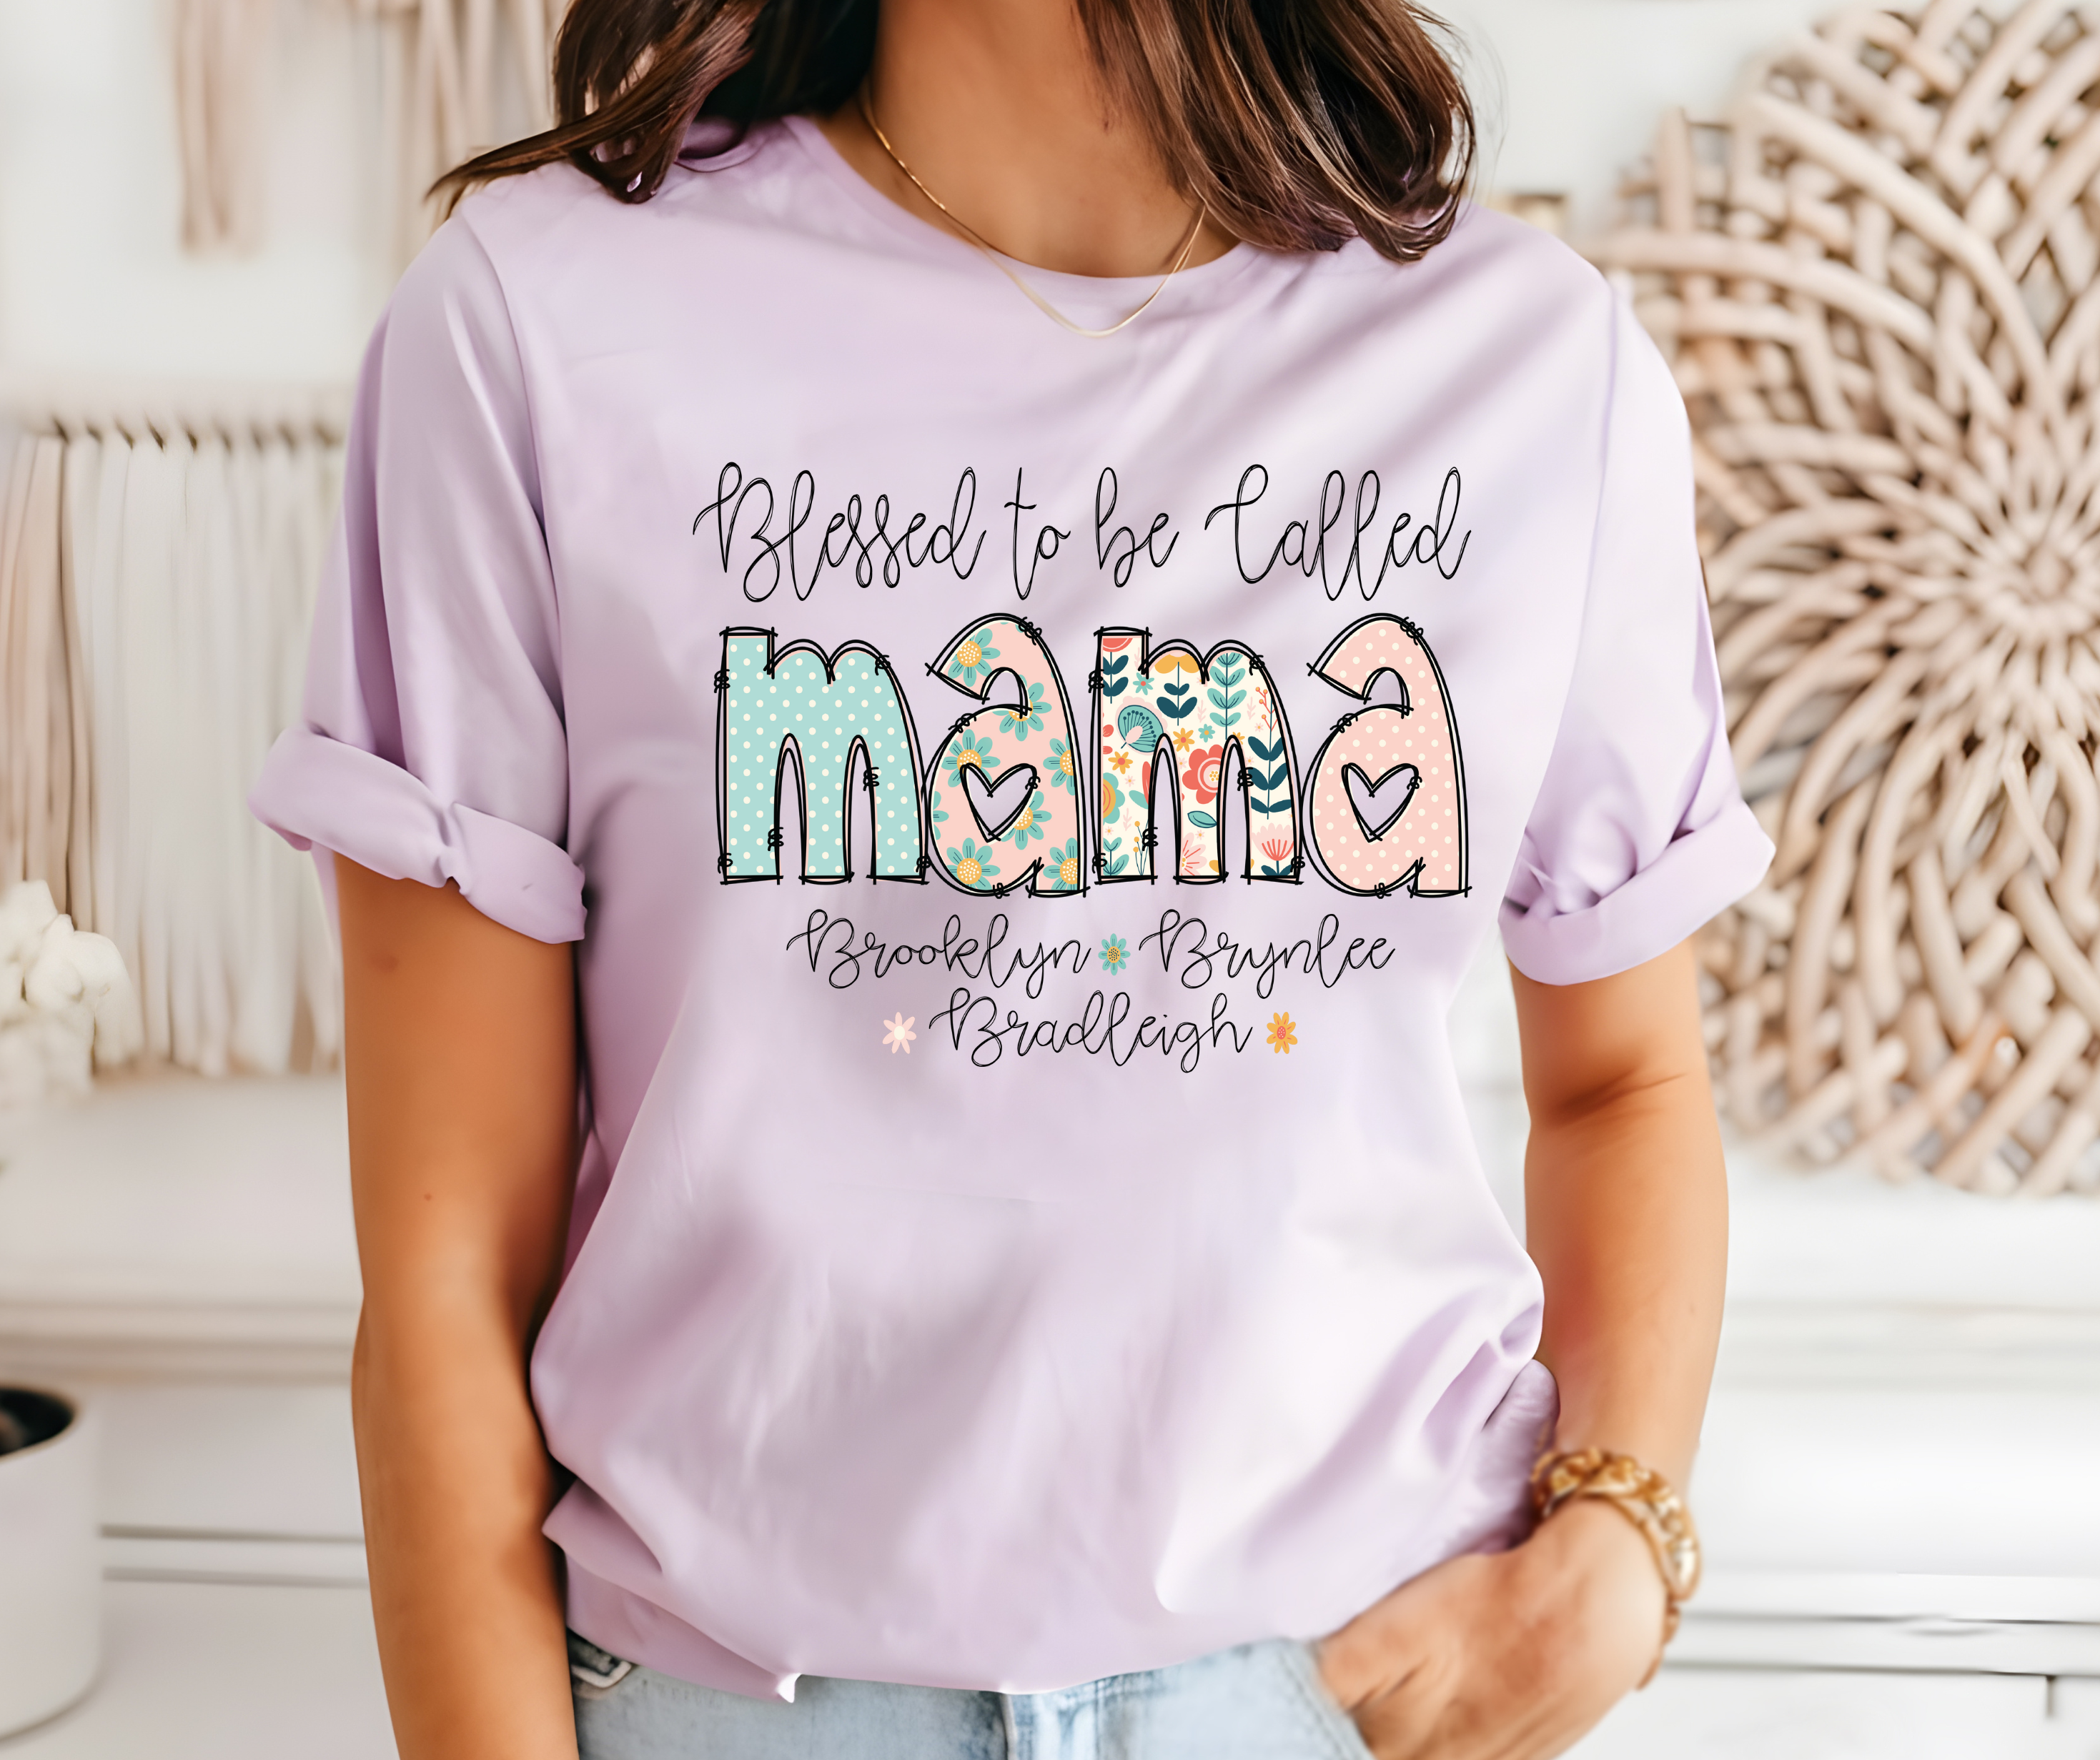 Blessed to be Called Mother's Day Design Mockup Fee ONLY - No Prints - No Digitals